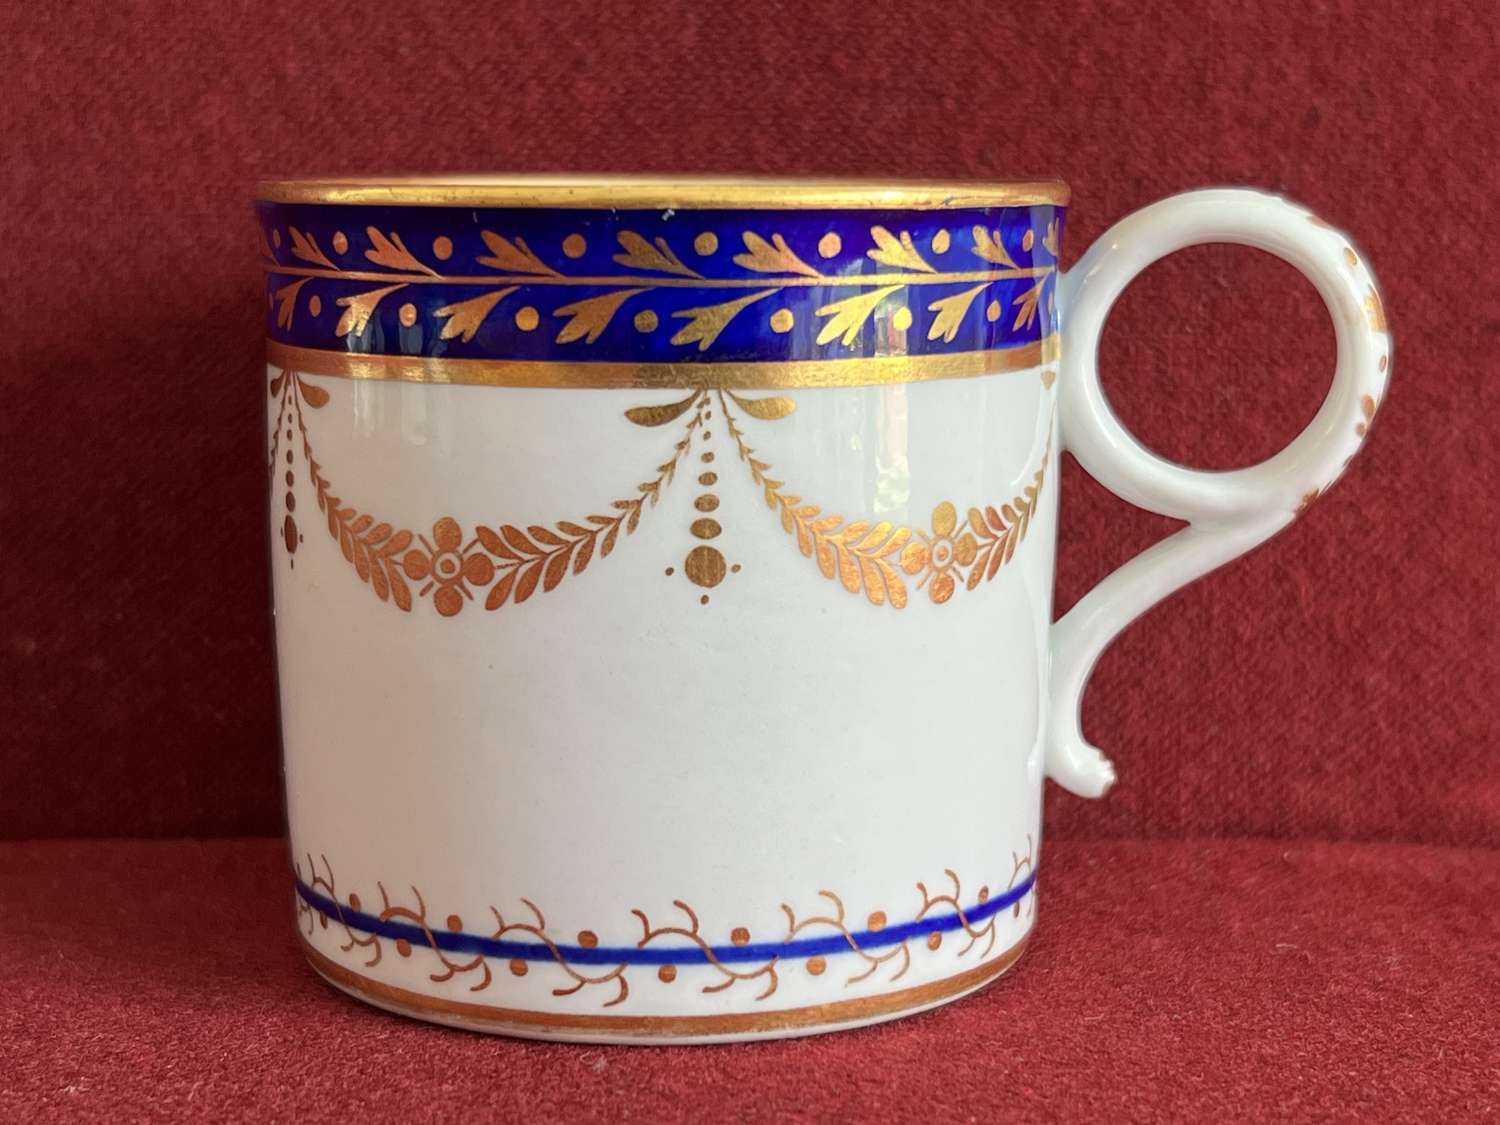 A Flight & Barr Worcester Porcelain Coffee Can c.1800